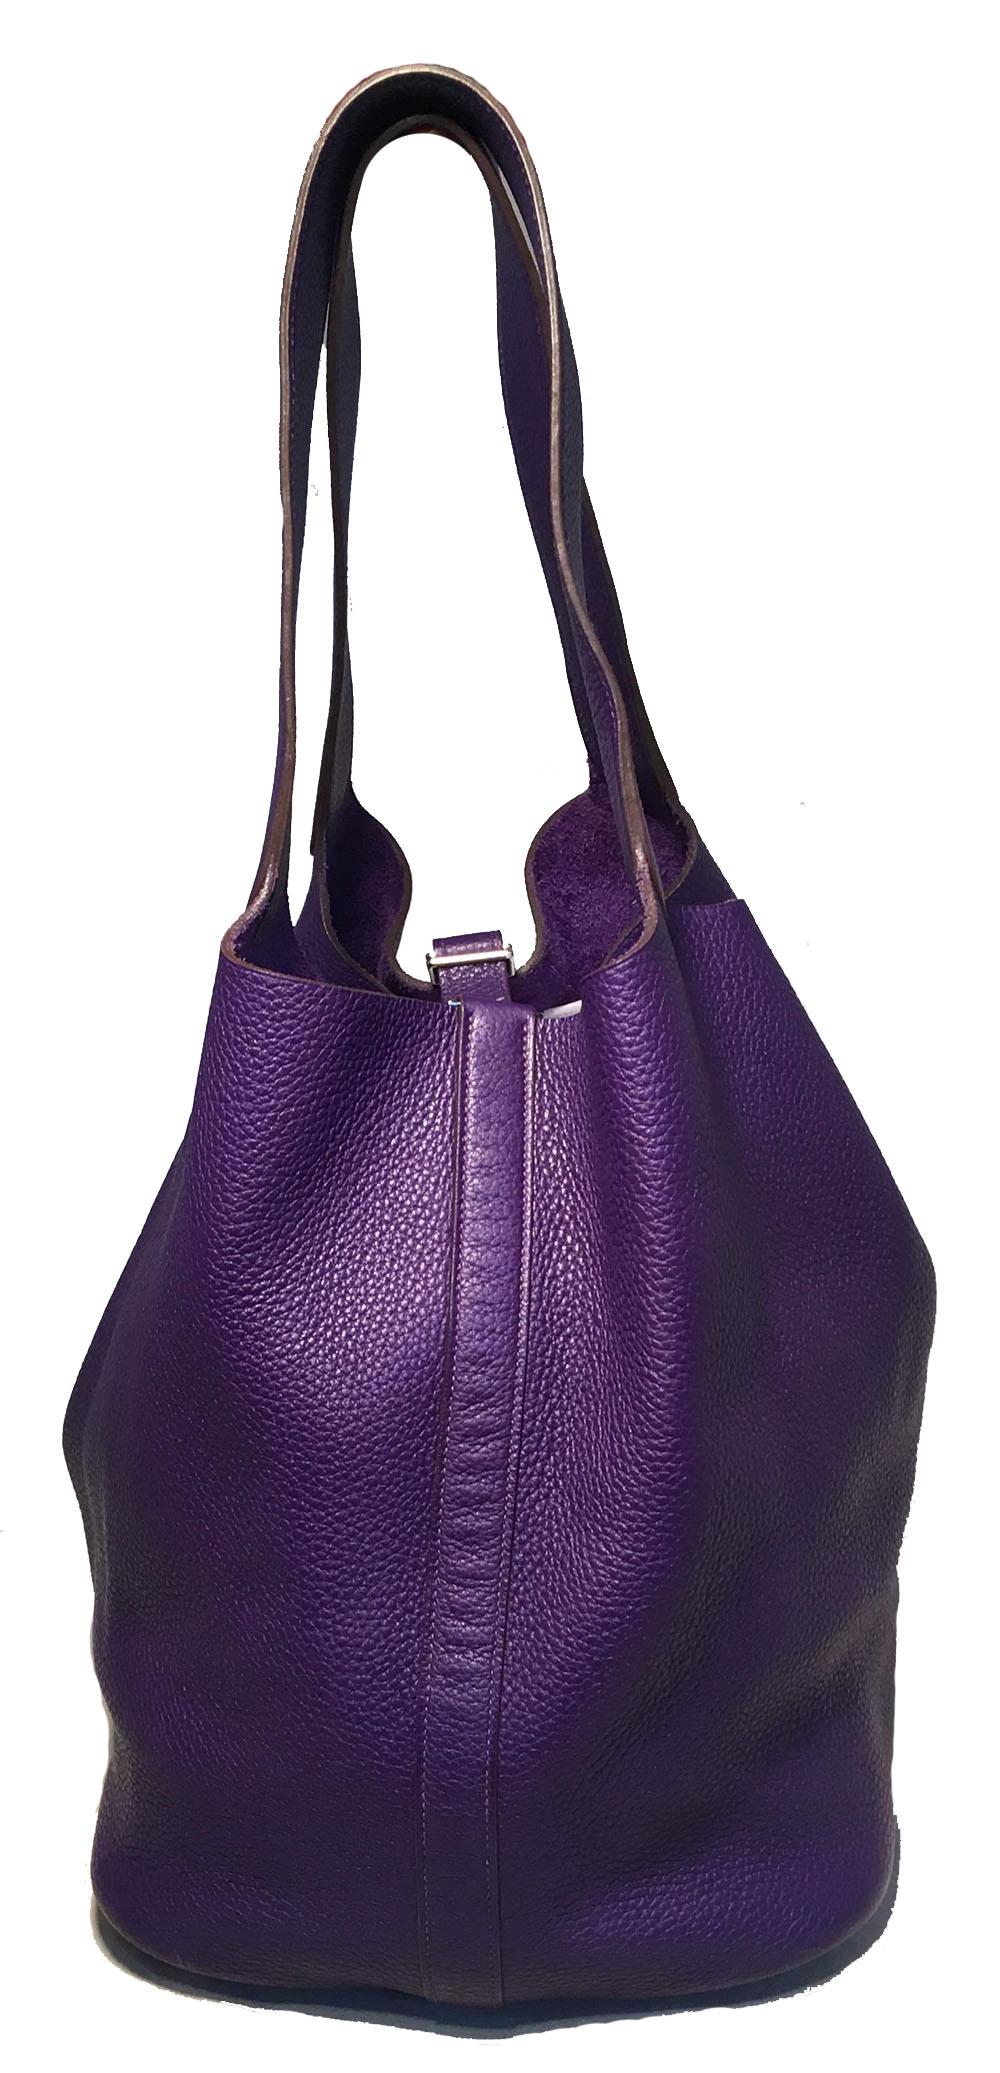 GORGEOUS Hermes Purple Clemence Leather Picotin TGM Handbag in excellent condition. Purple clemence leather exterior trimmed with silver palladium hardware. Perfect size for a variety of occasions and fits all your essentials and more in classic